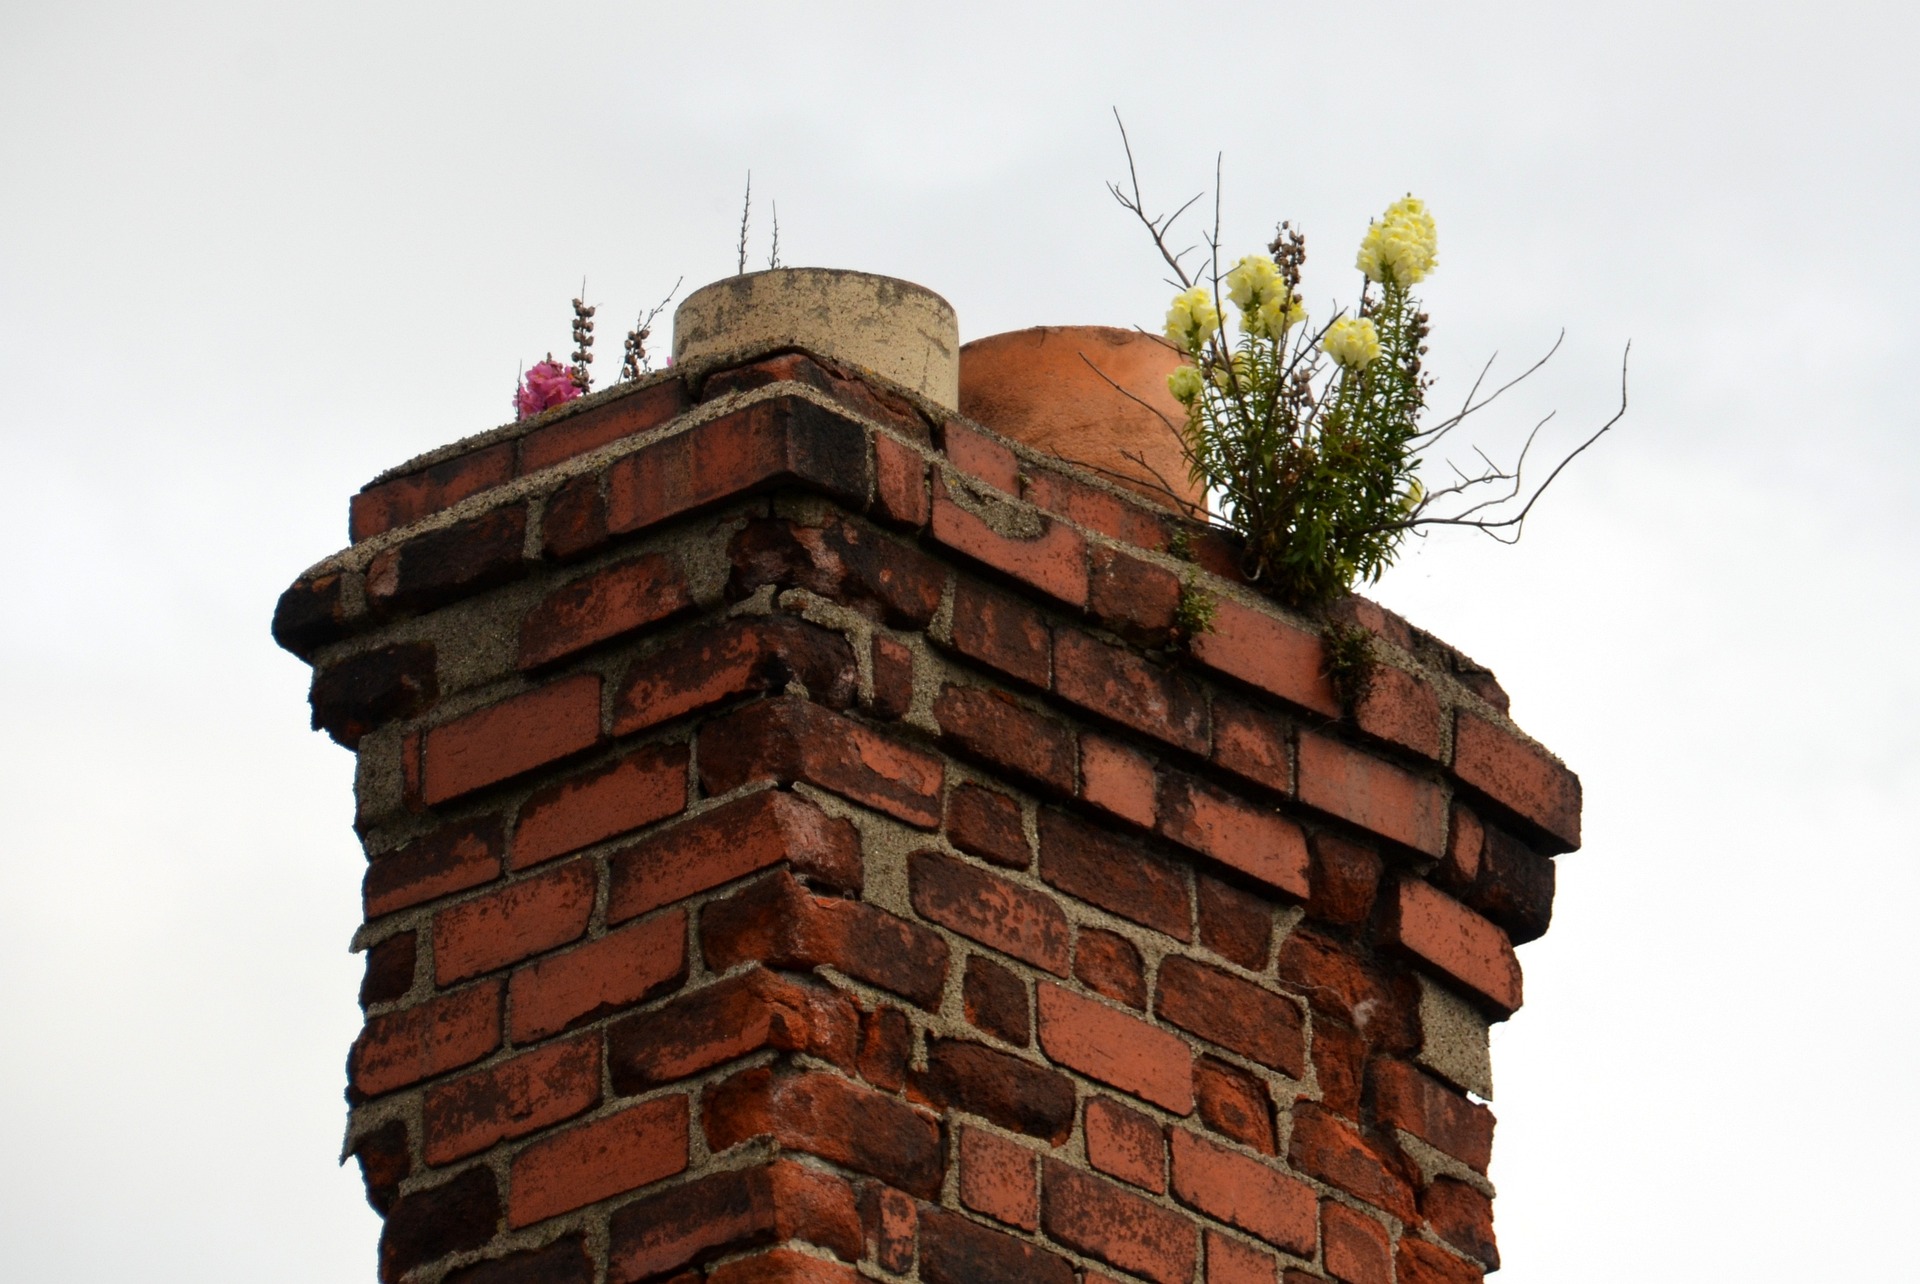 Chimney with plants growing